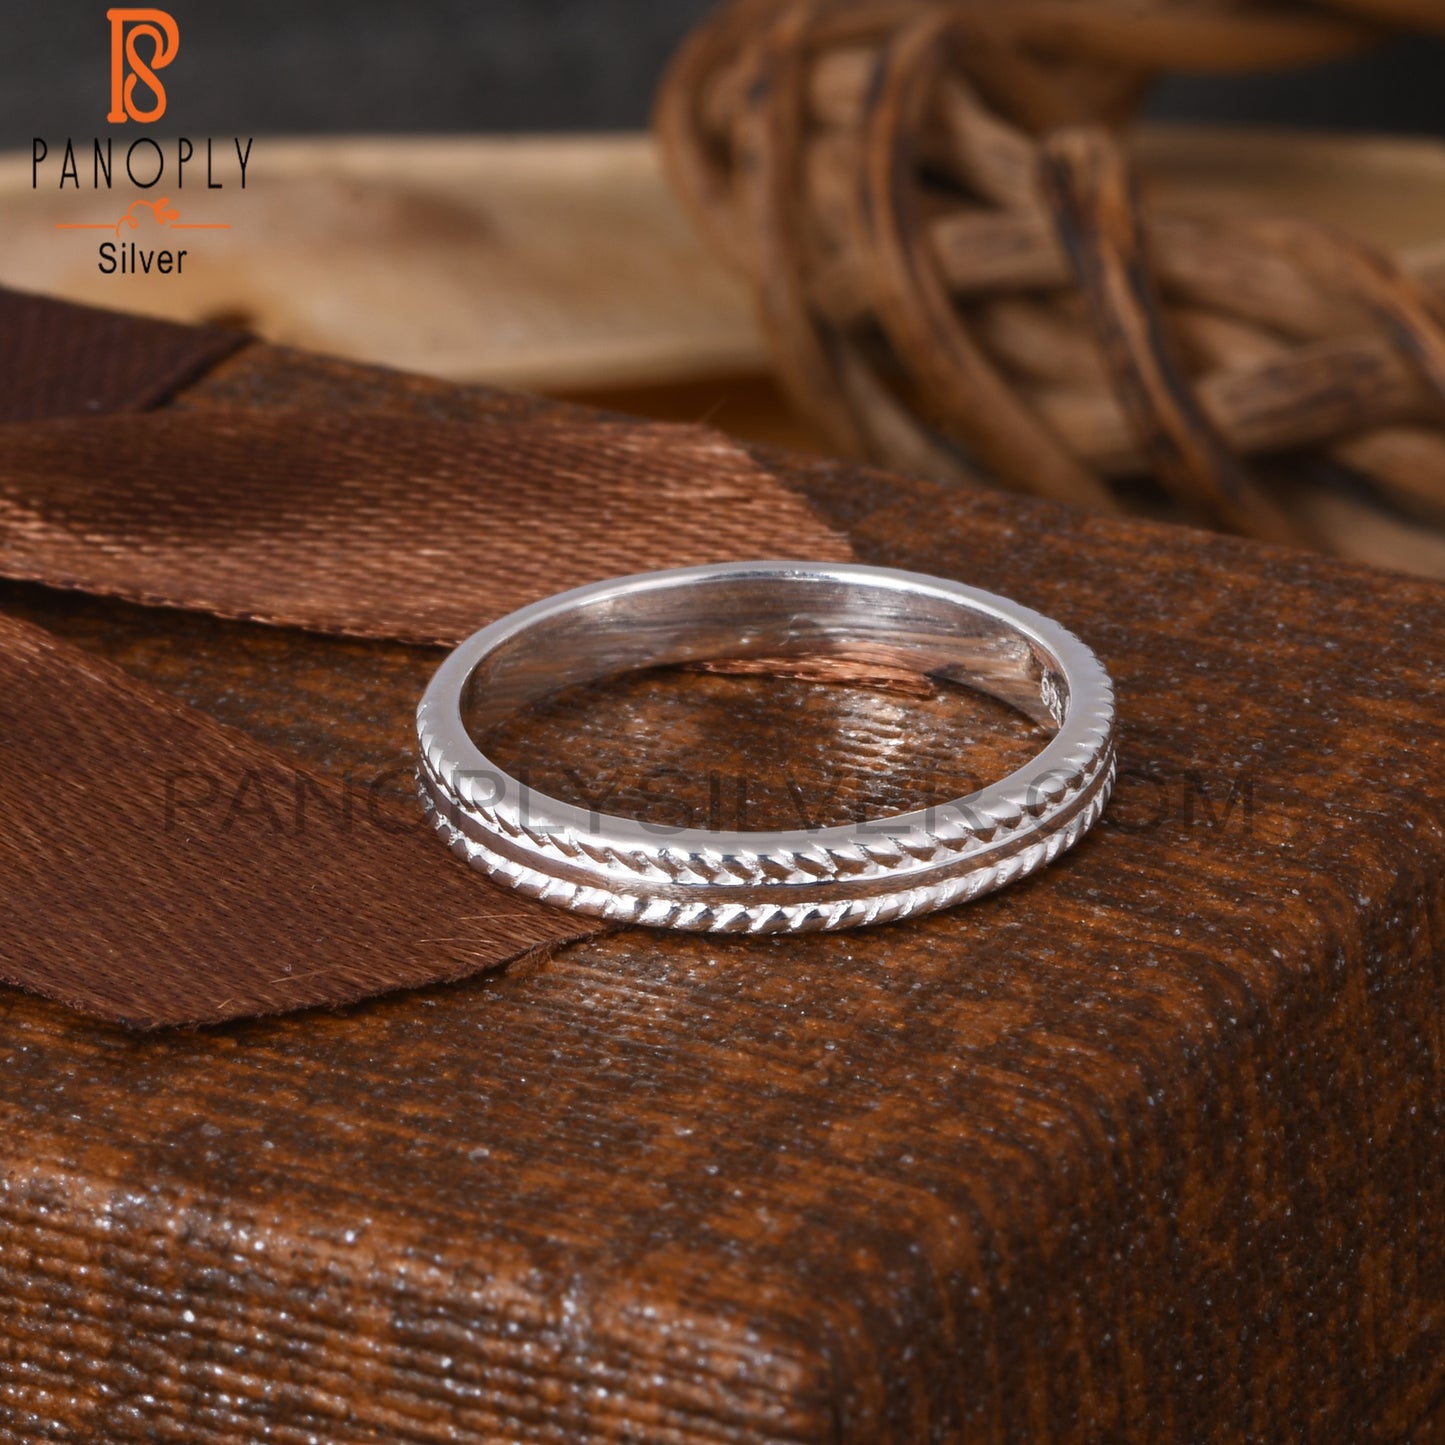 Minimalist 925 Sterling Silver Plain Ring Band